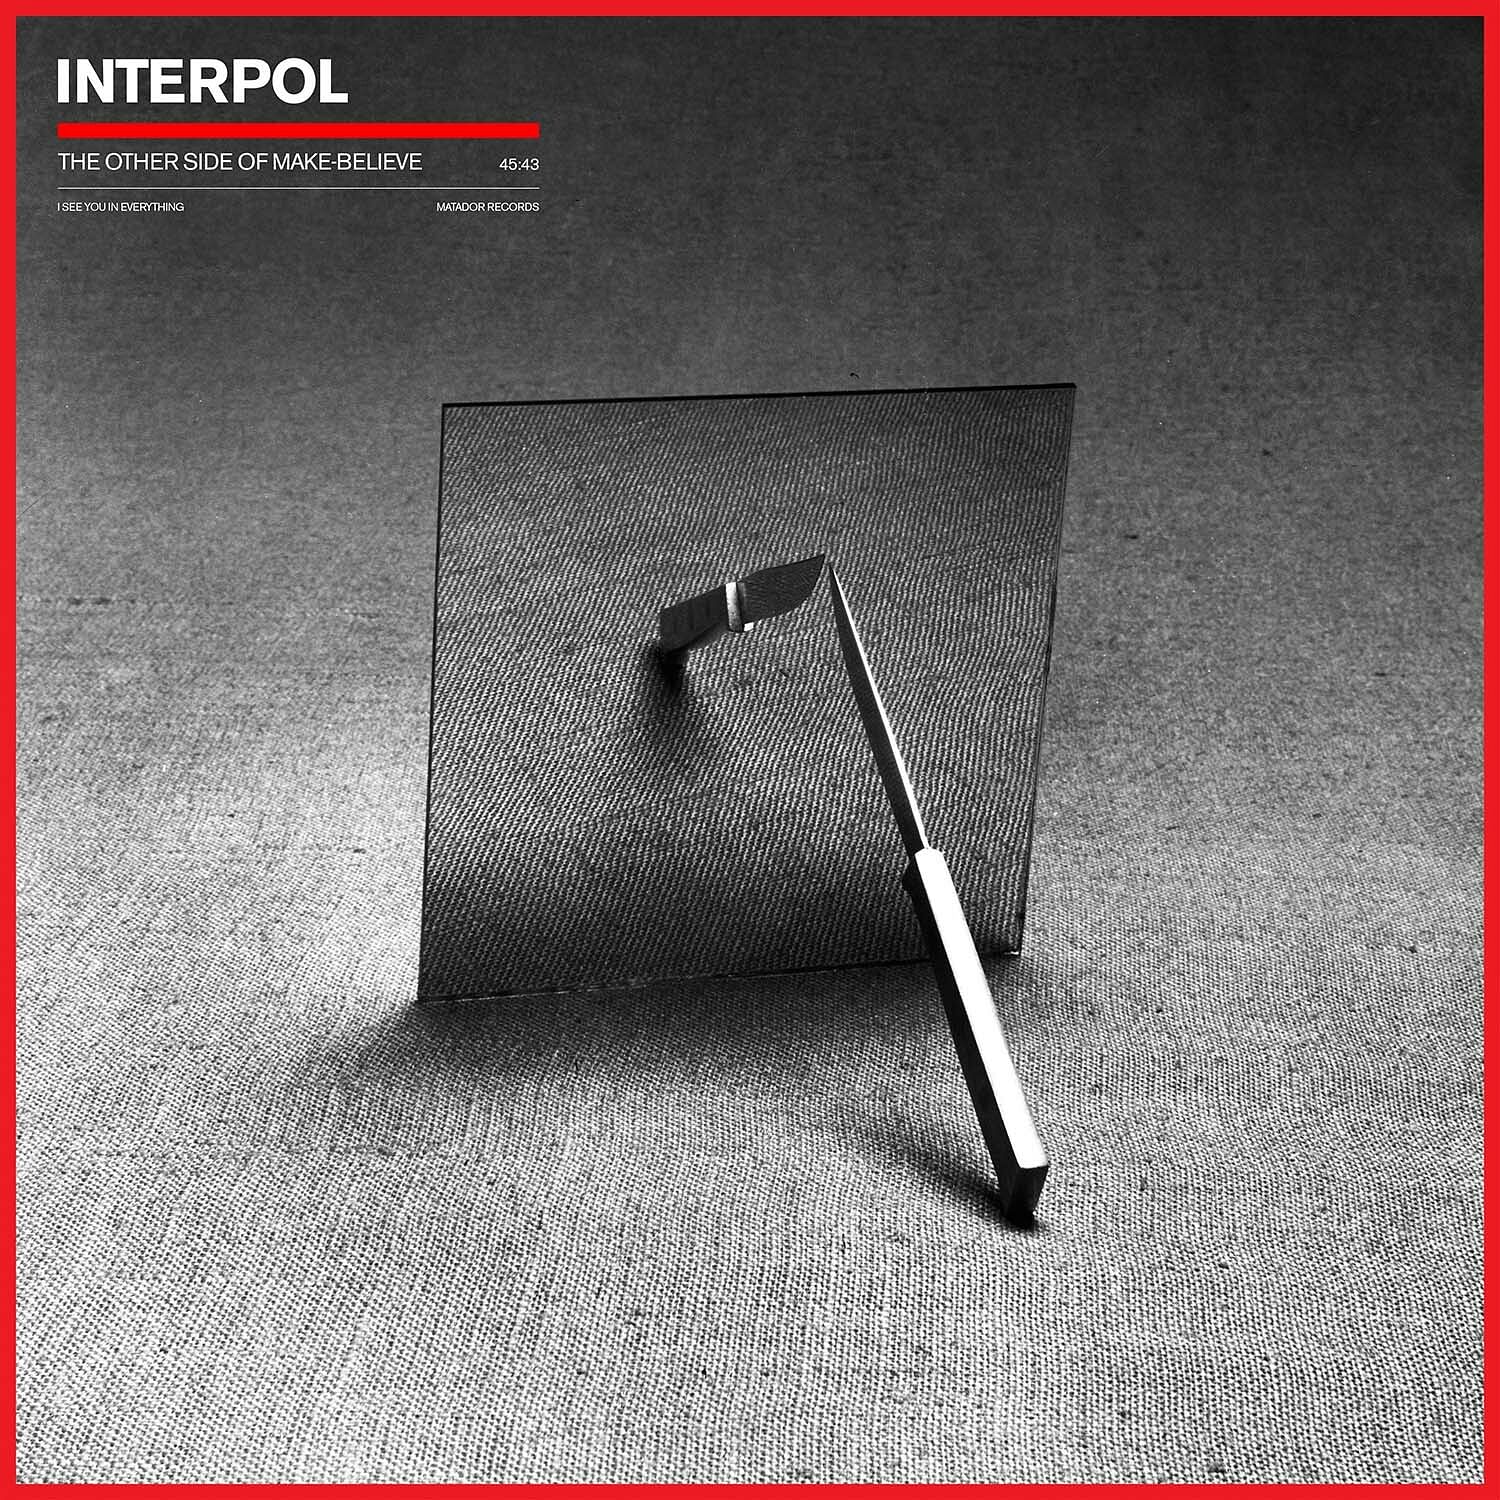 Interpol - The Other Side of Make Believe